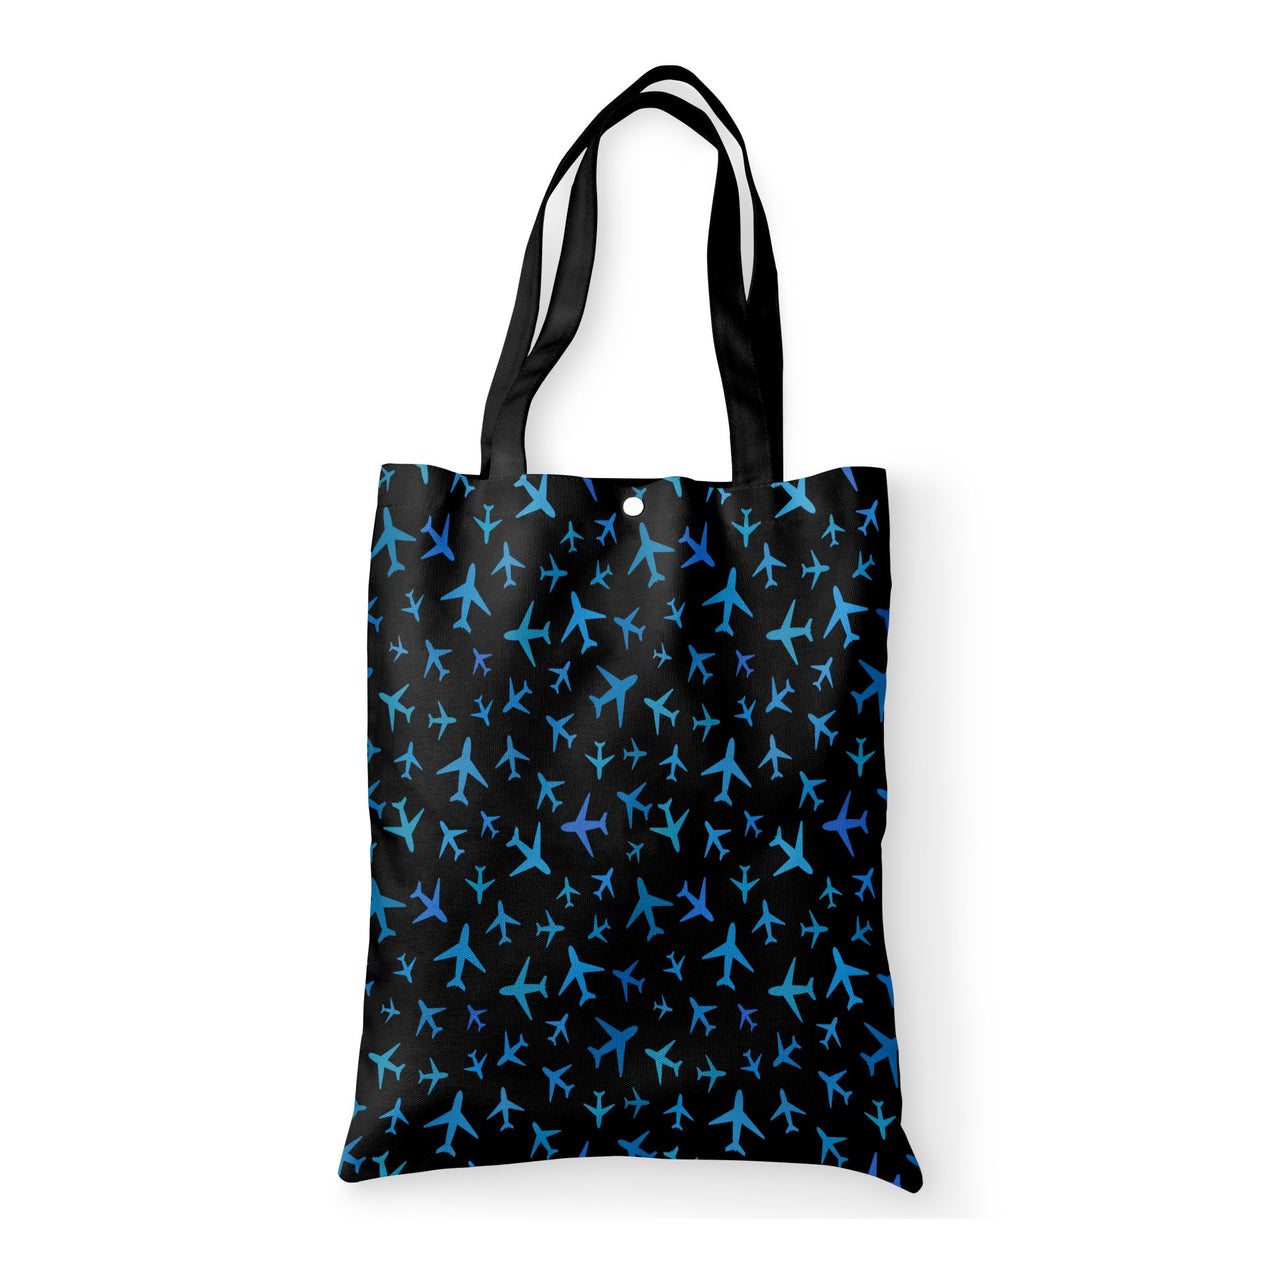 Many Airplanes Black Designed Tote Bags